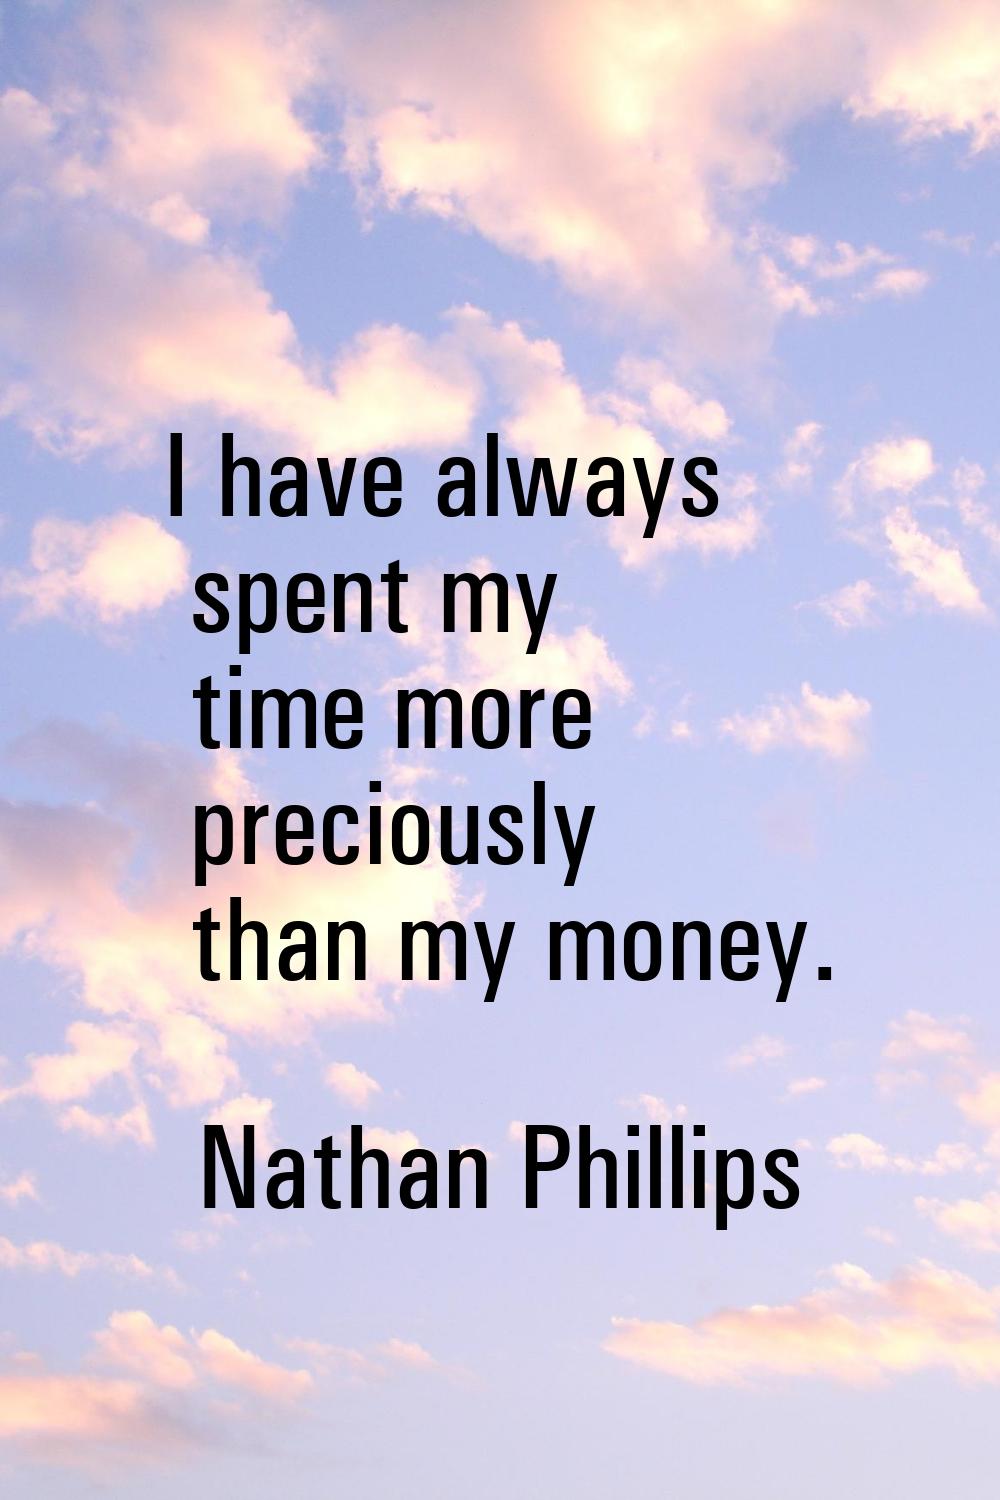 I have always spent my time more preciously than my money.